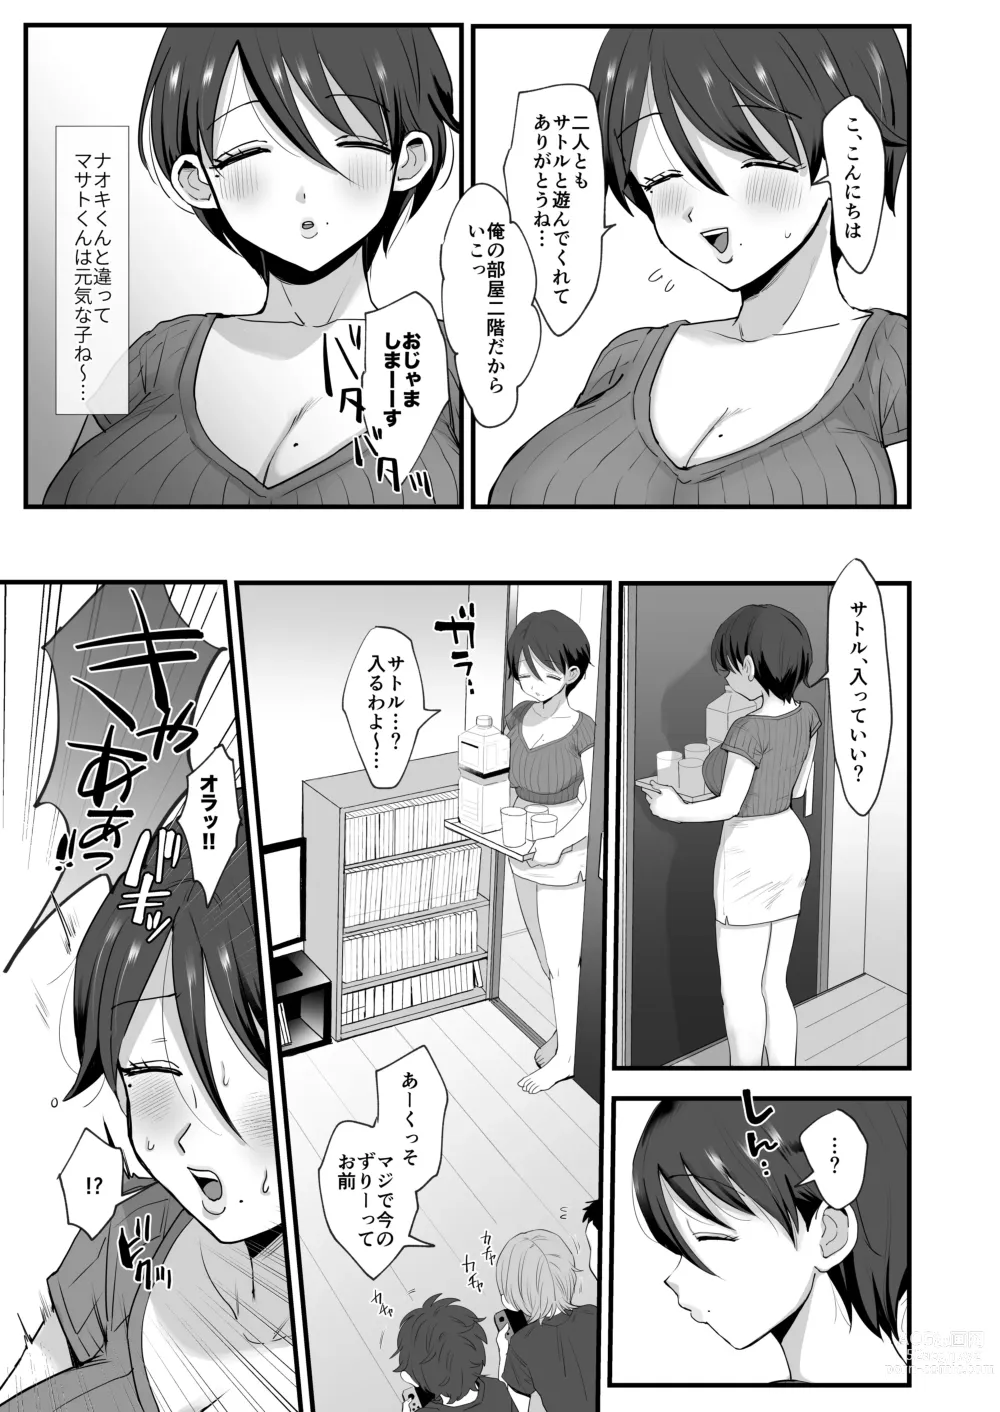 Page 7 of doujinshi Gentle, Busty, Narrow Eyed Momma.